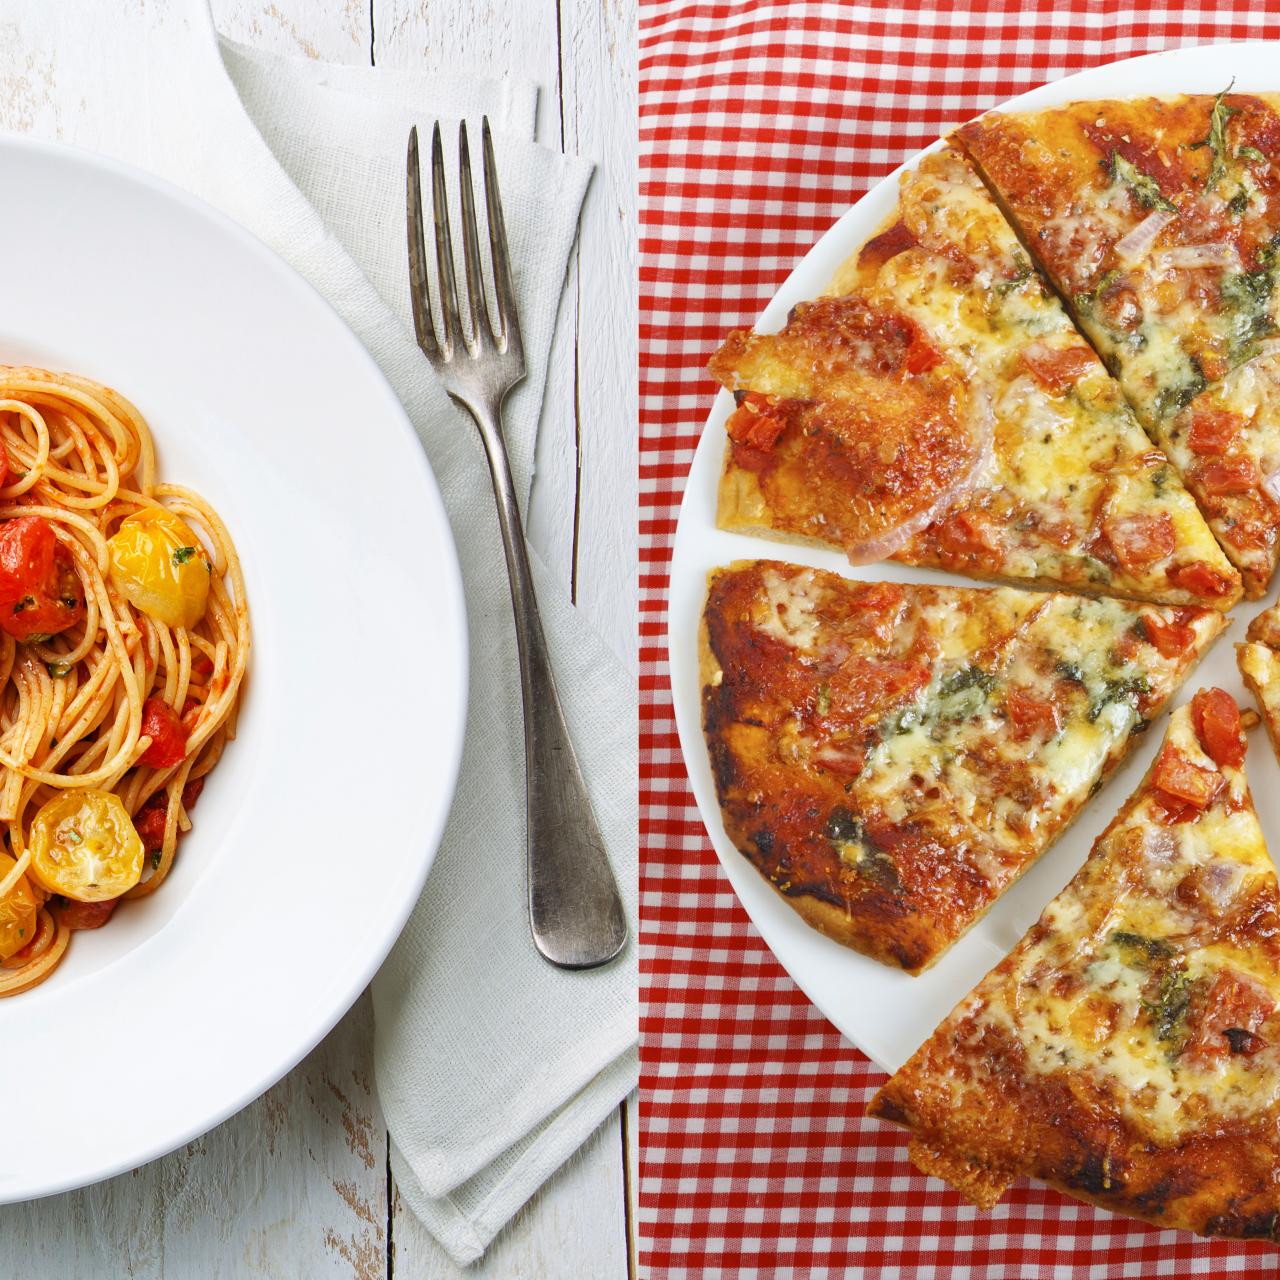 Food Fight: Pizza vs. Pasta, Food Network Healthy Eats: Recipes, Ideas,  and Food News